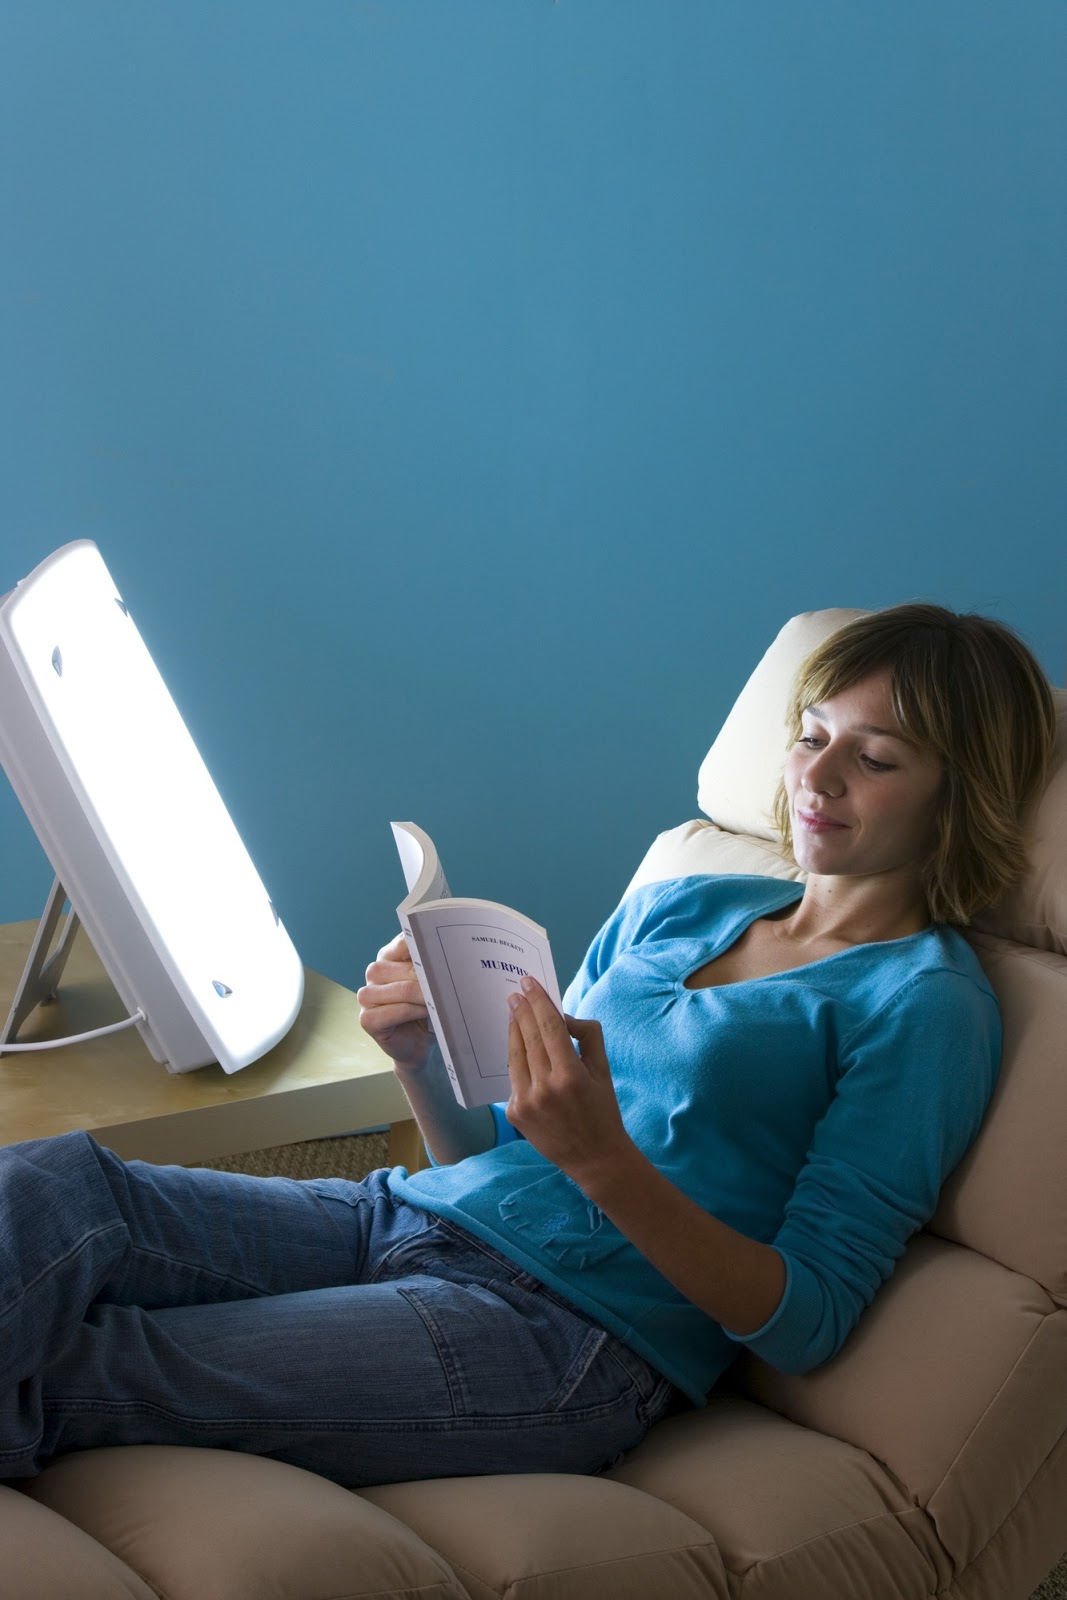 What Is Light Therapy and Does It Work?